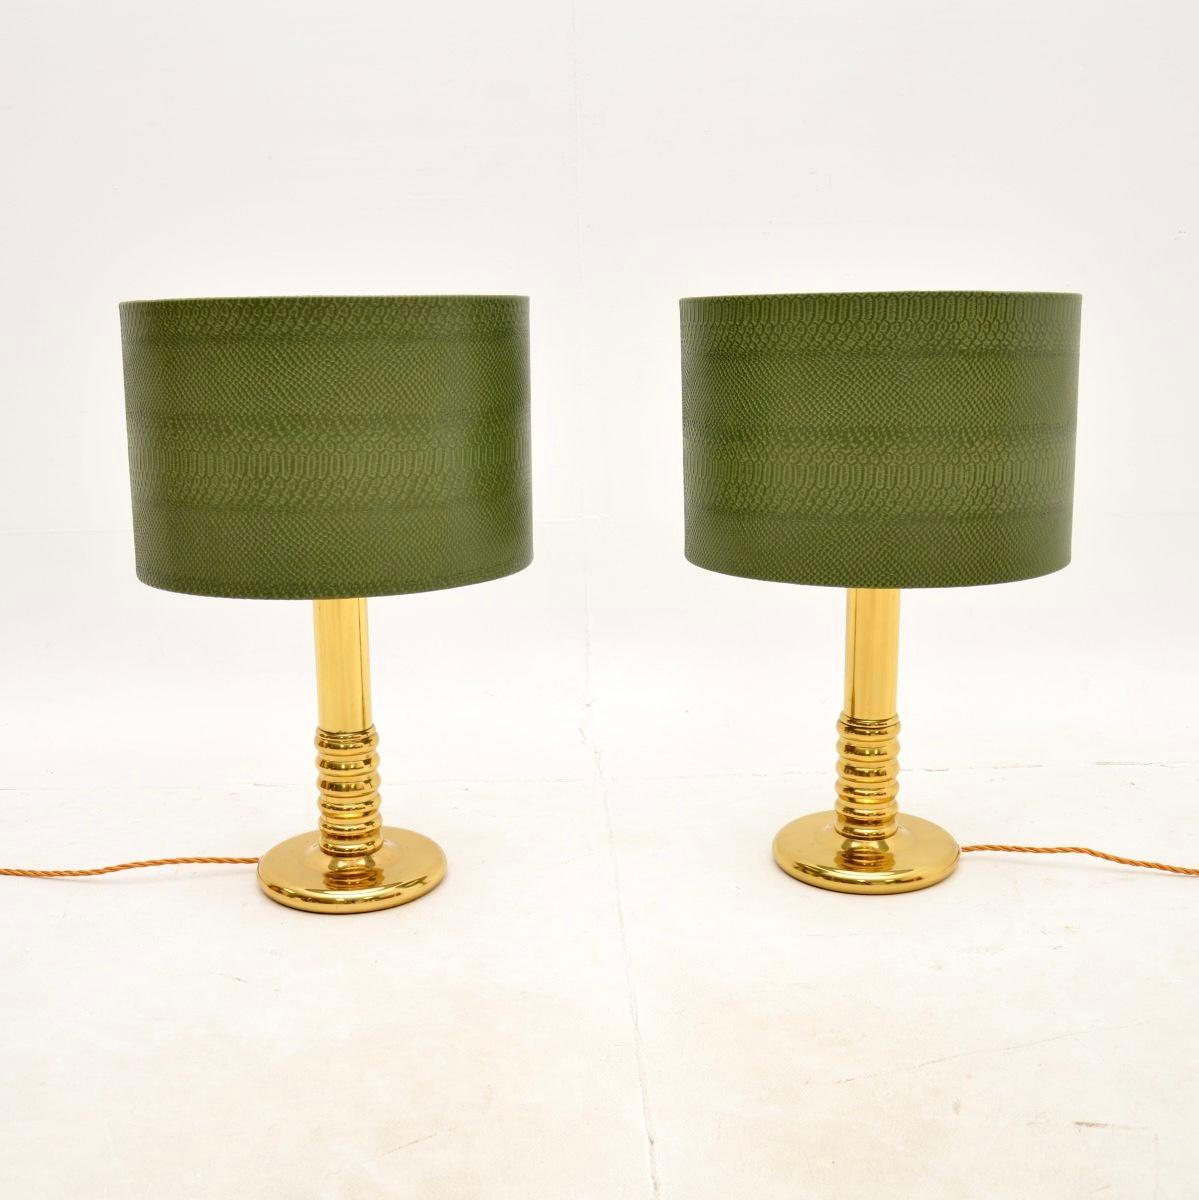 A very stylish and well made pair of Swedish vintage brass table lamps. We have recently imported these from Sweden, they date from around the 1970’s.

They are of excellent quality and have a fantastic design. The solid brass frames are beautifully